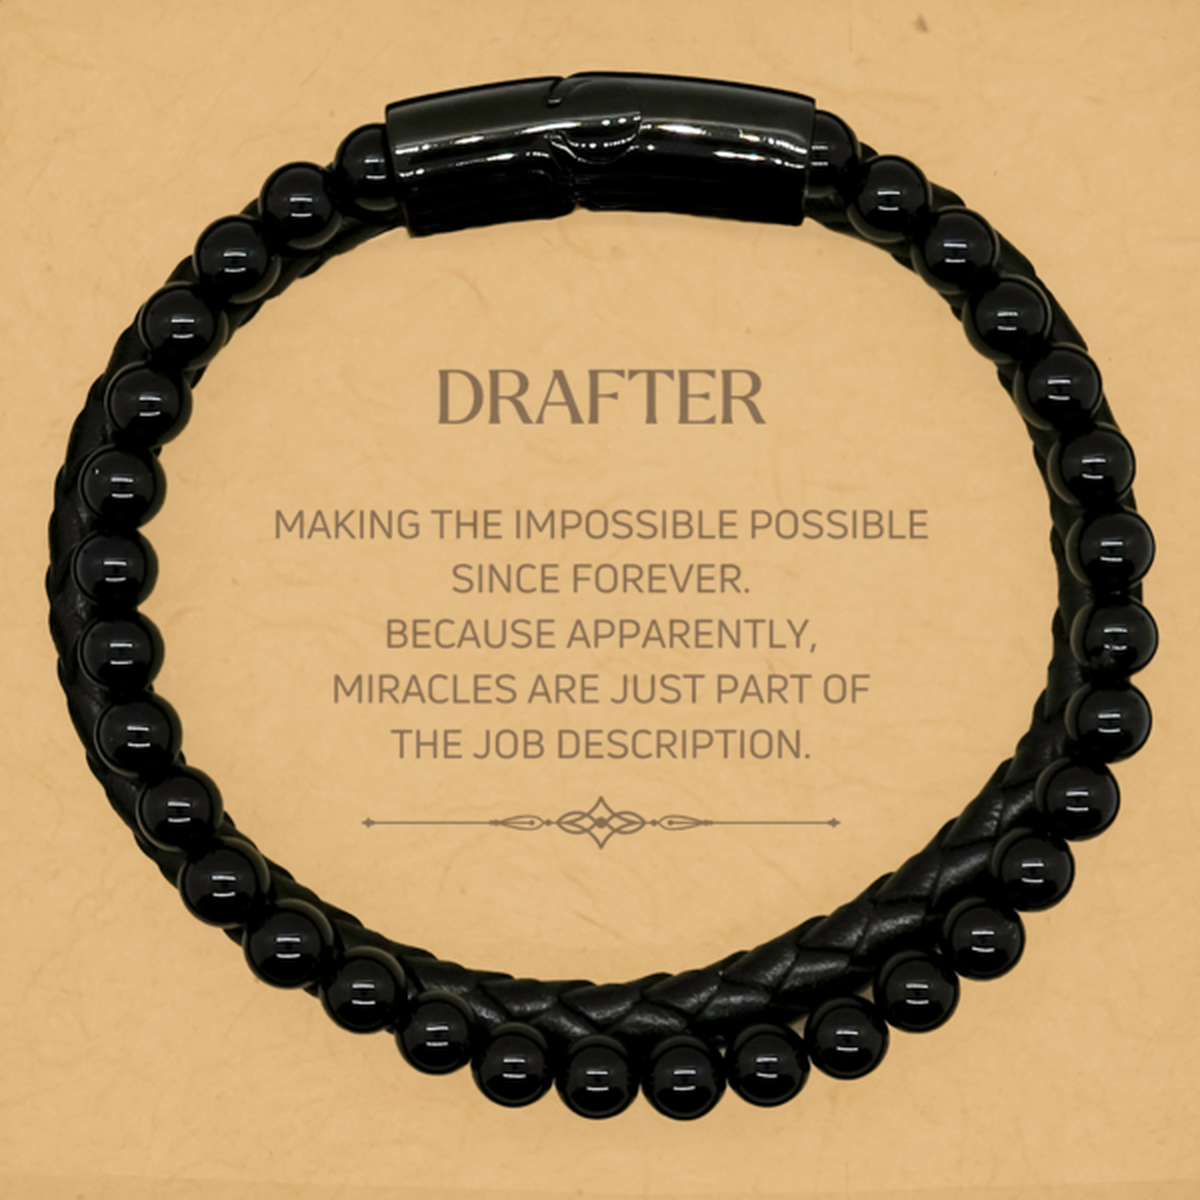 Funny Drafter Gifts, Miracles are just part of the job description, Inspirational Birthday Stone Leather Bracelets For Drafter, Men, Women, Coworkers, Friends, Boss